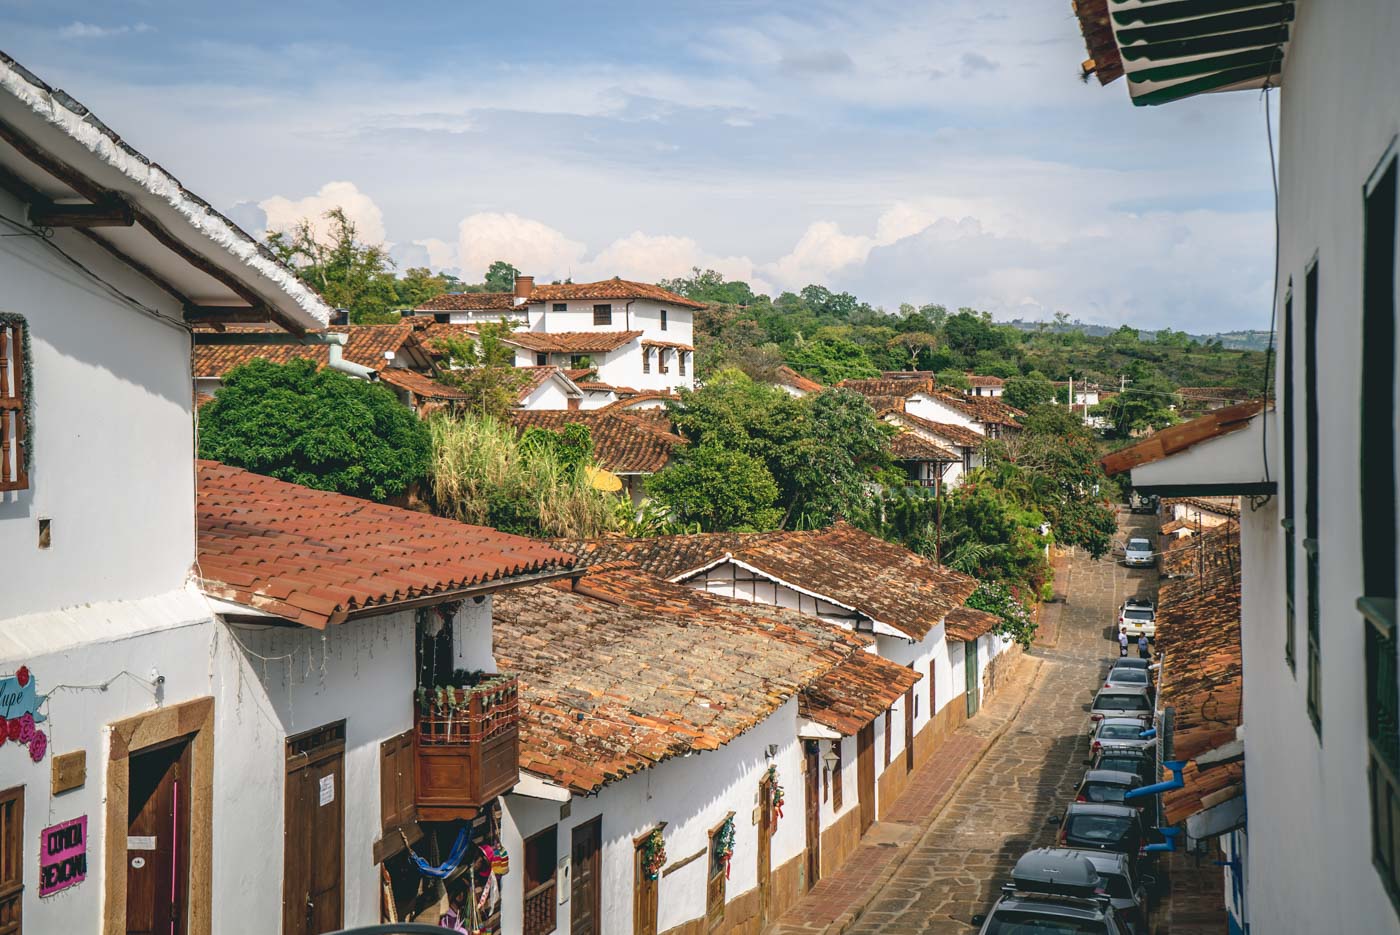 Travel in Colombia: Small town of Barrichara, near San Gil, Colombia